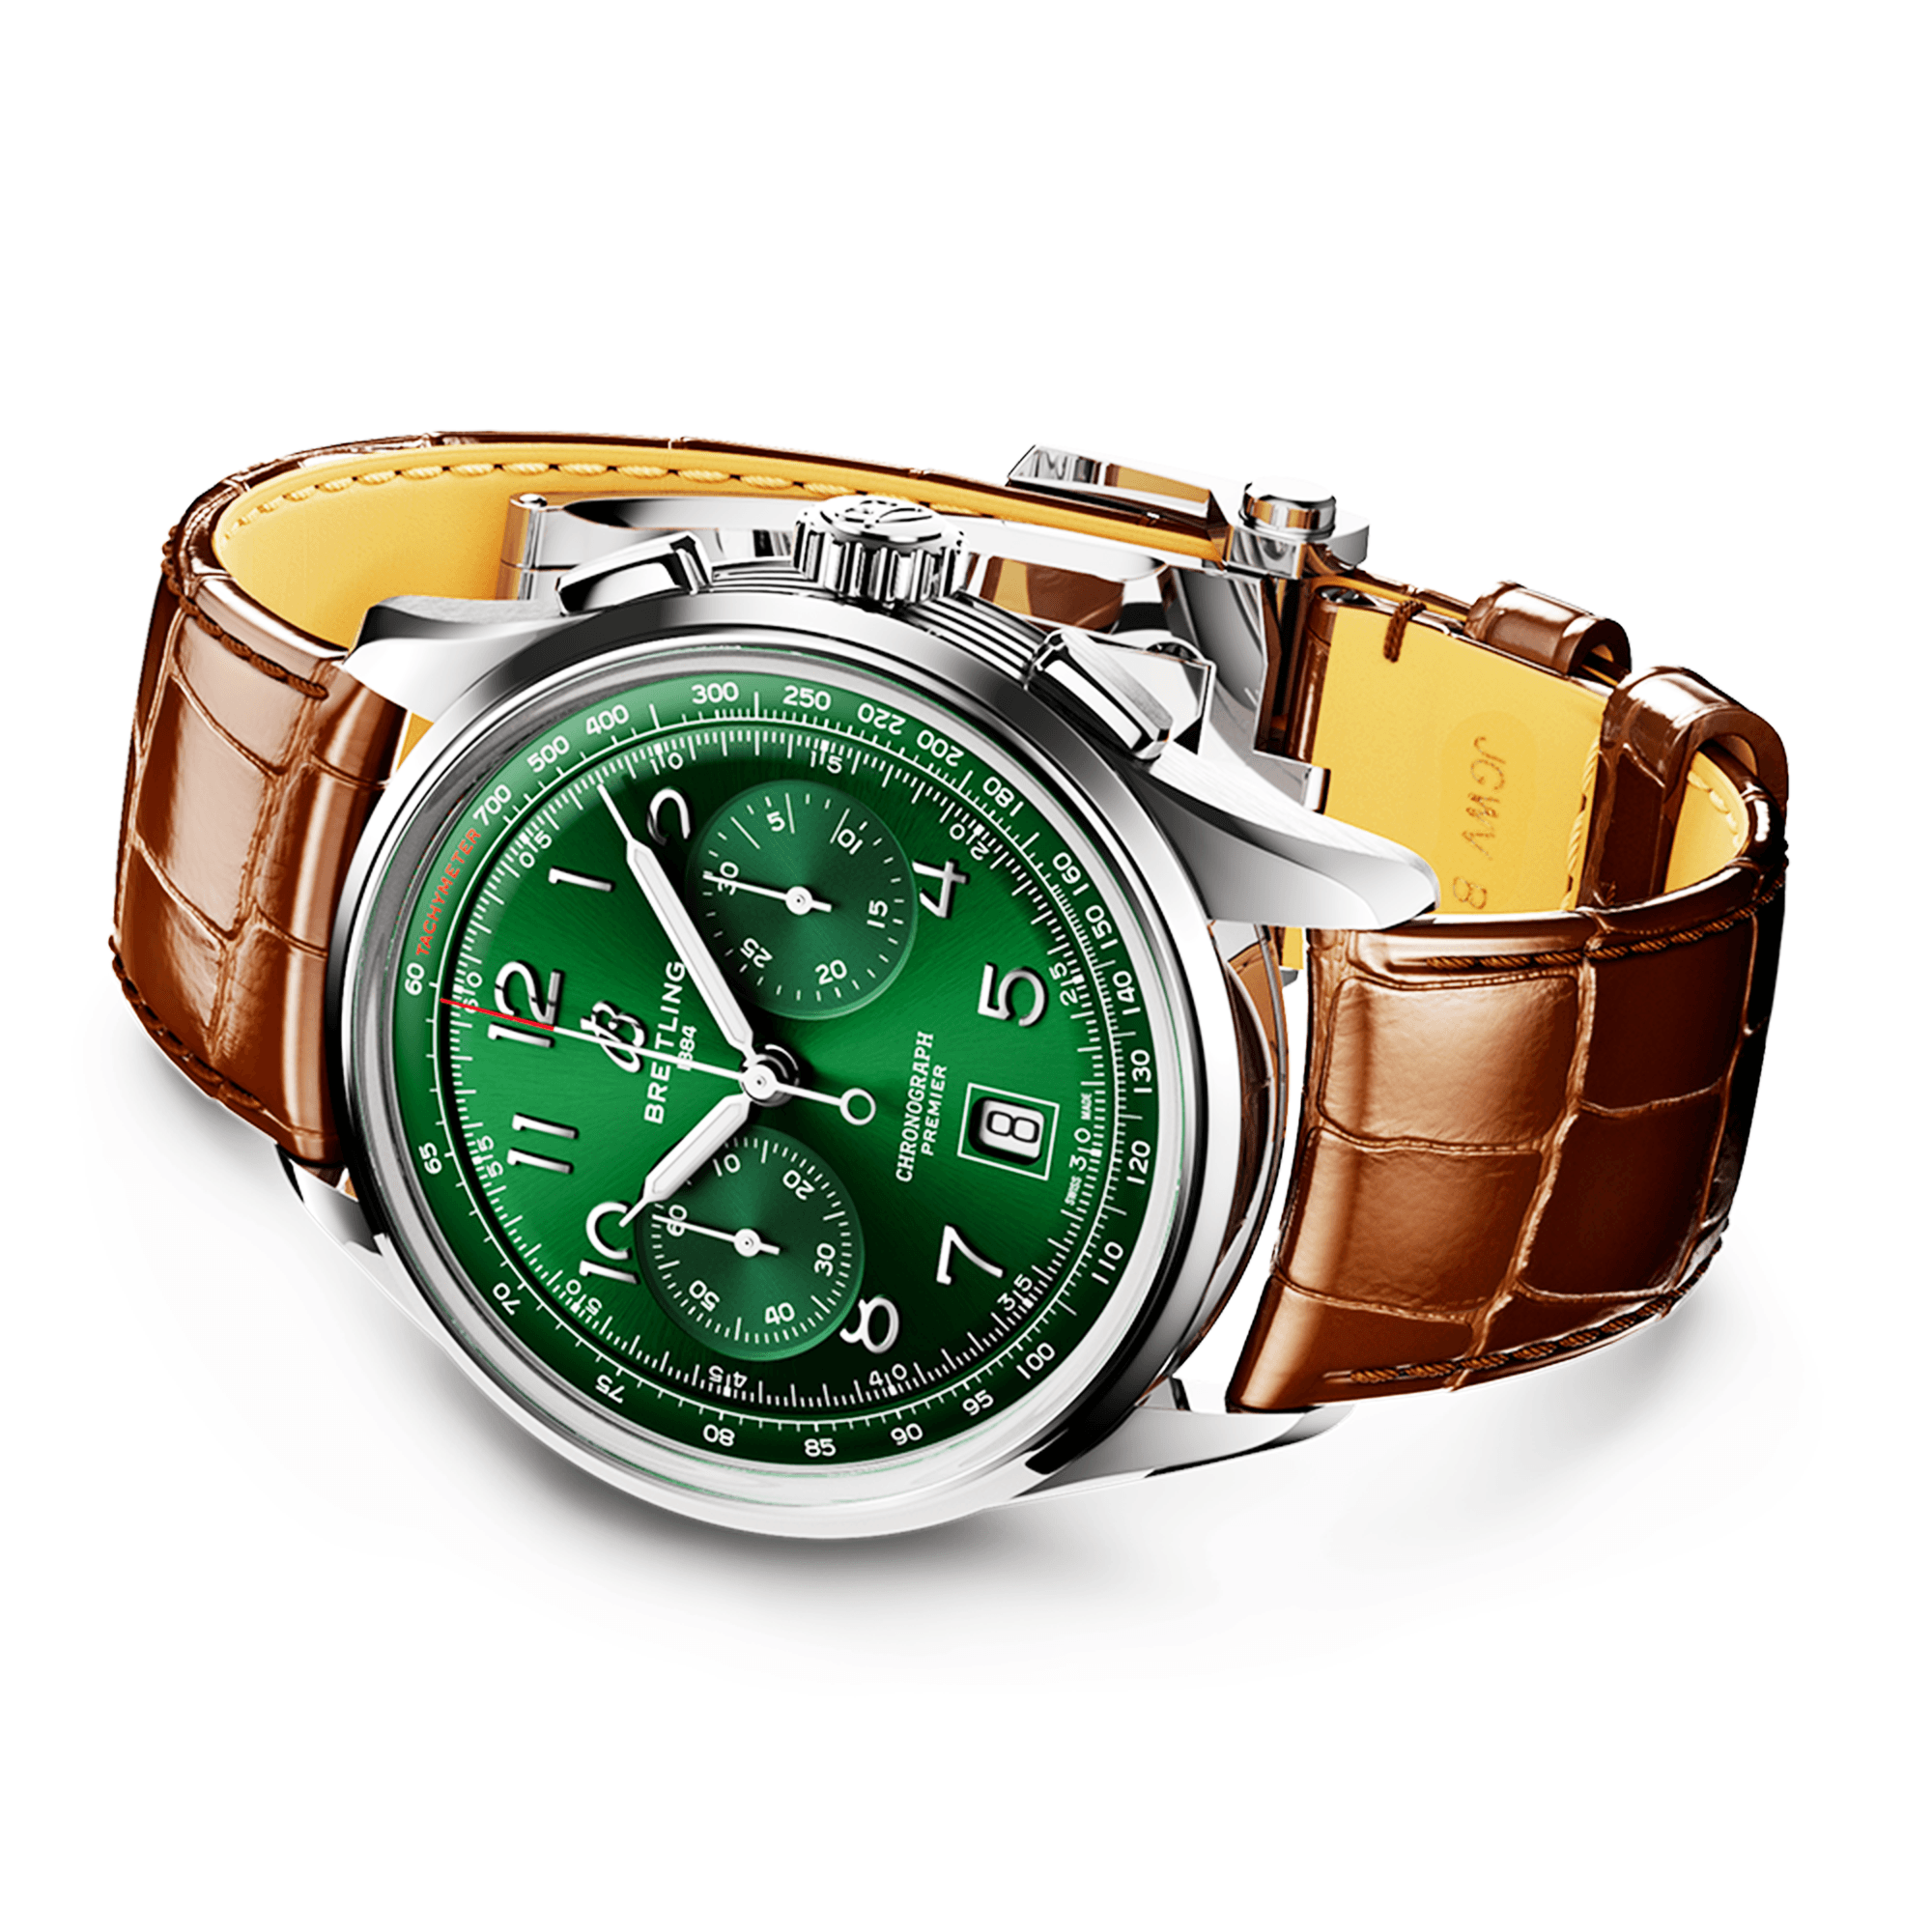 Premier B01 42mm Green Dial Mens Automatic Chronograph Strap Watch